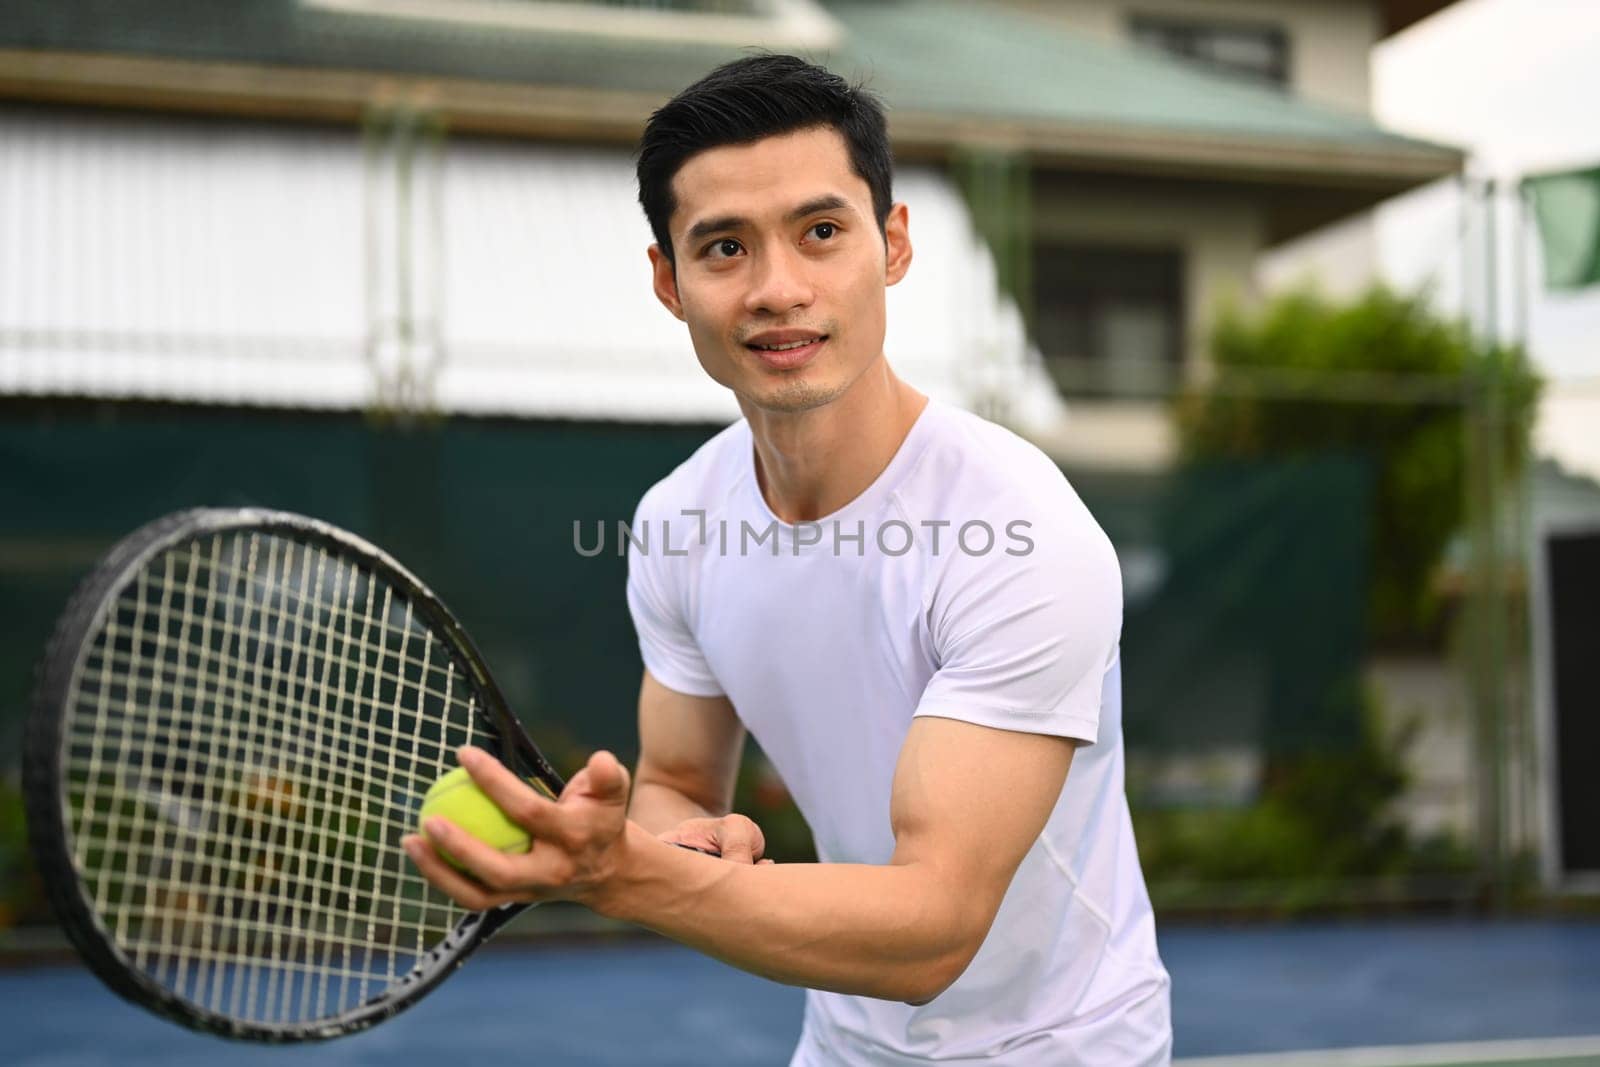 Focused asian male tennis player serving tennis ball during a match on open court. Sport, fitness, training and active life concept.